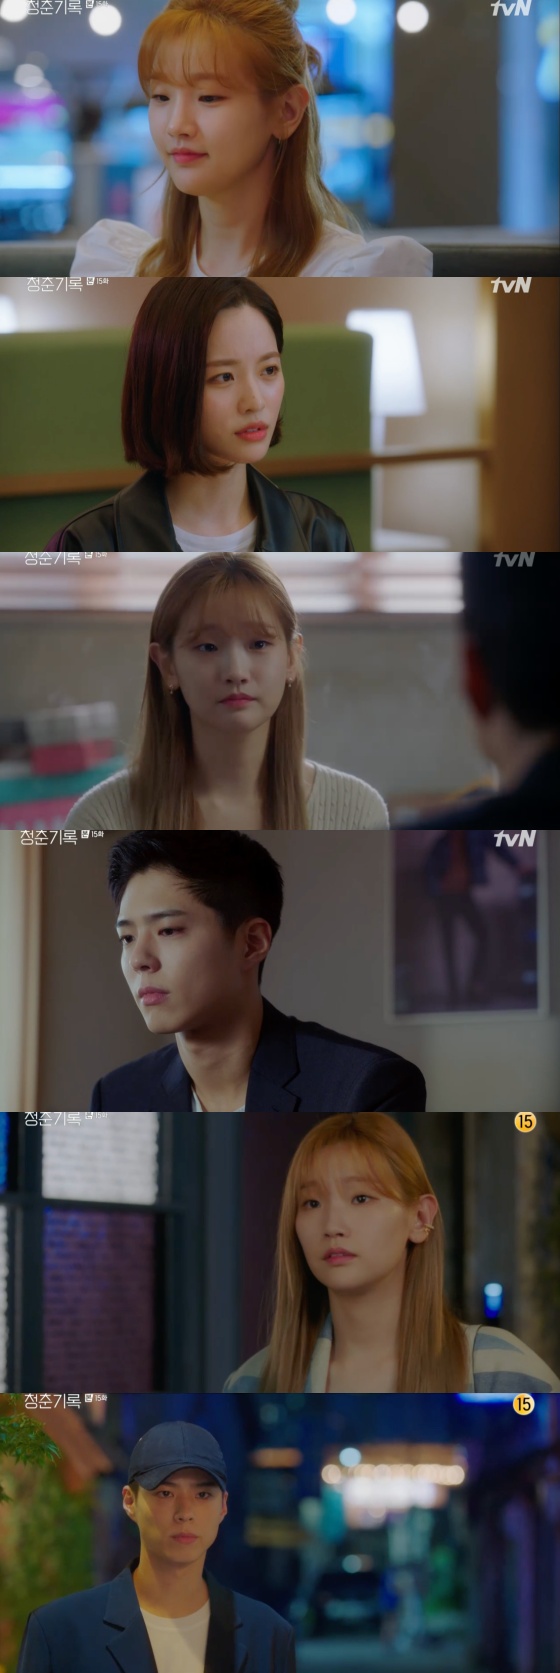 In the TVN Monday drama Record of Youth, which was broadcast on the afternoon of the 26th, there was a scene in which Park So-dam said farewell to Park Bo-gum.On this day, he denied that it was not true to Kim Soo-man (Bae Yoon-kyung), who came to confirm the relationship between him and Sa Hye-joon.Kim changed his strategy by talking about his ex-girlfriend Jeong Ji-a (Sul In-ah). Kim said, I met Jeong Ji-a.Im in a class with Jeong Ji-a and Sa Hye-jun, and if they go back together, theyll be happy to meet everyone around them.An Jeong-ha was bitter and bitter, but he did not acknowledge his relationship with Sa Hye-joon.In the end, Sa Hye-joon, who met with Ahn Hye-ha for a long time, showed a excited appearance. However, he said, Lets break up.Do you remember saying that you will never say sorry if you love me? And then said, Do you know how many times I said sorry when I met you?Sa Hye-joon then stepped out to take An Jeong-ha and tried to ride an elevator together, but he rode alone on the elevator, saying, Thats enough.However, Sa Hye-joon did not accept the separation of Ahn Jeong-ha. Sa Hye-joon went to the makeup shop of Ahn Jeong-ha and asked, Why are you here?Sa Hye-joon said, I could not break up with you and caught An Jeong-ha.